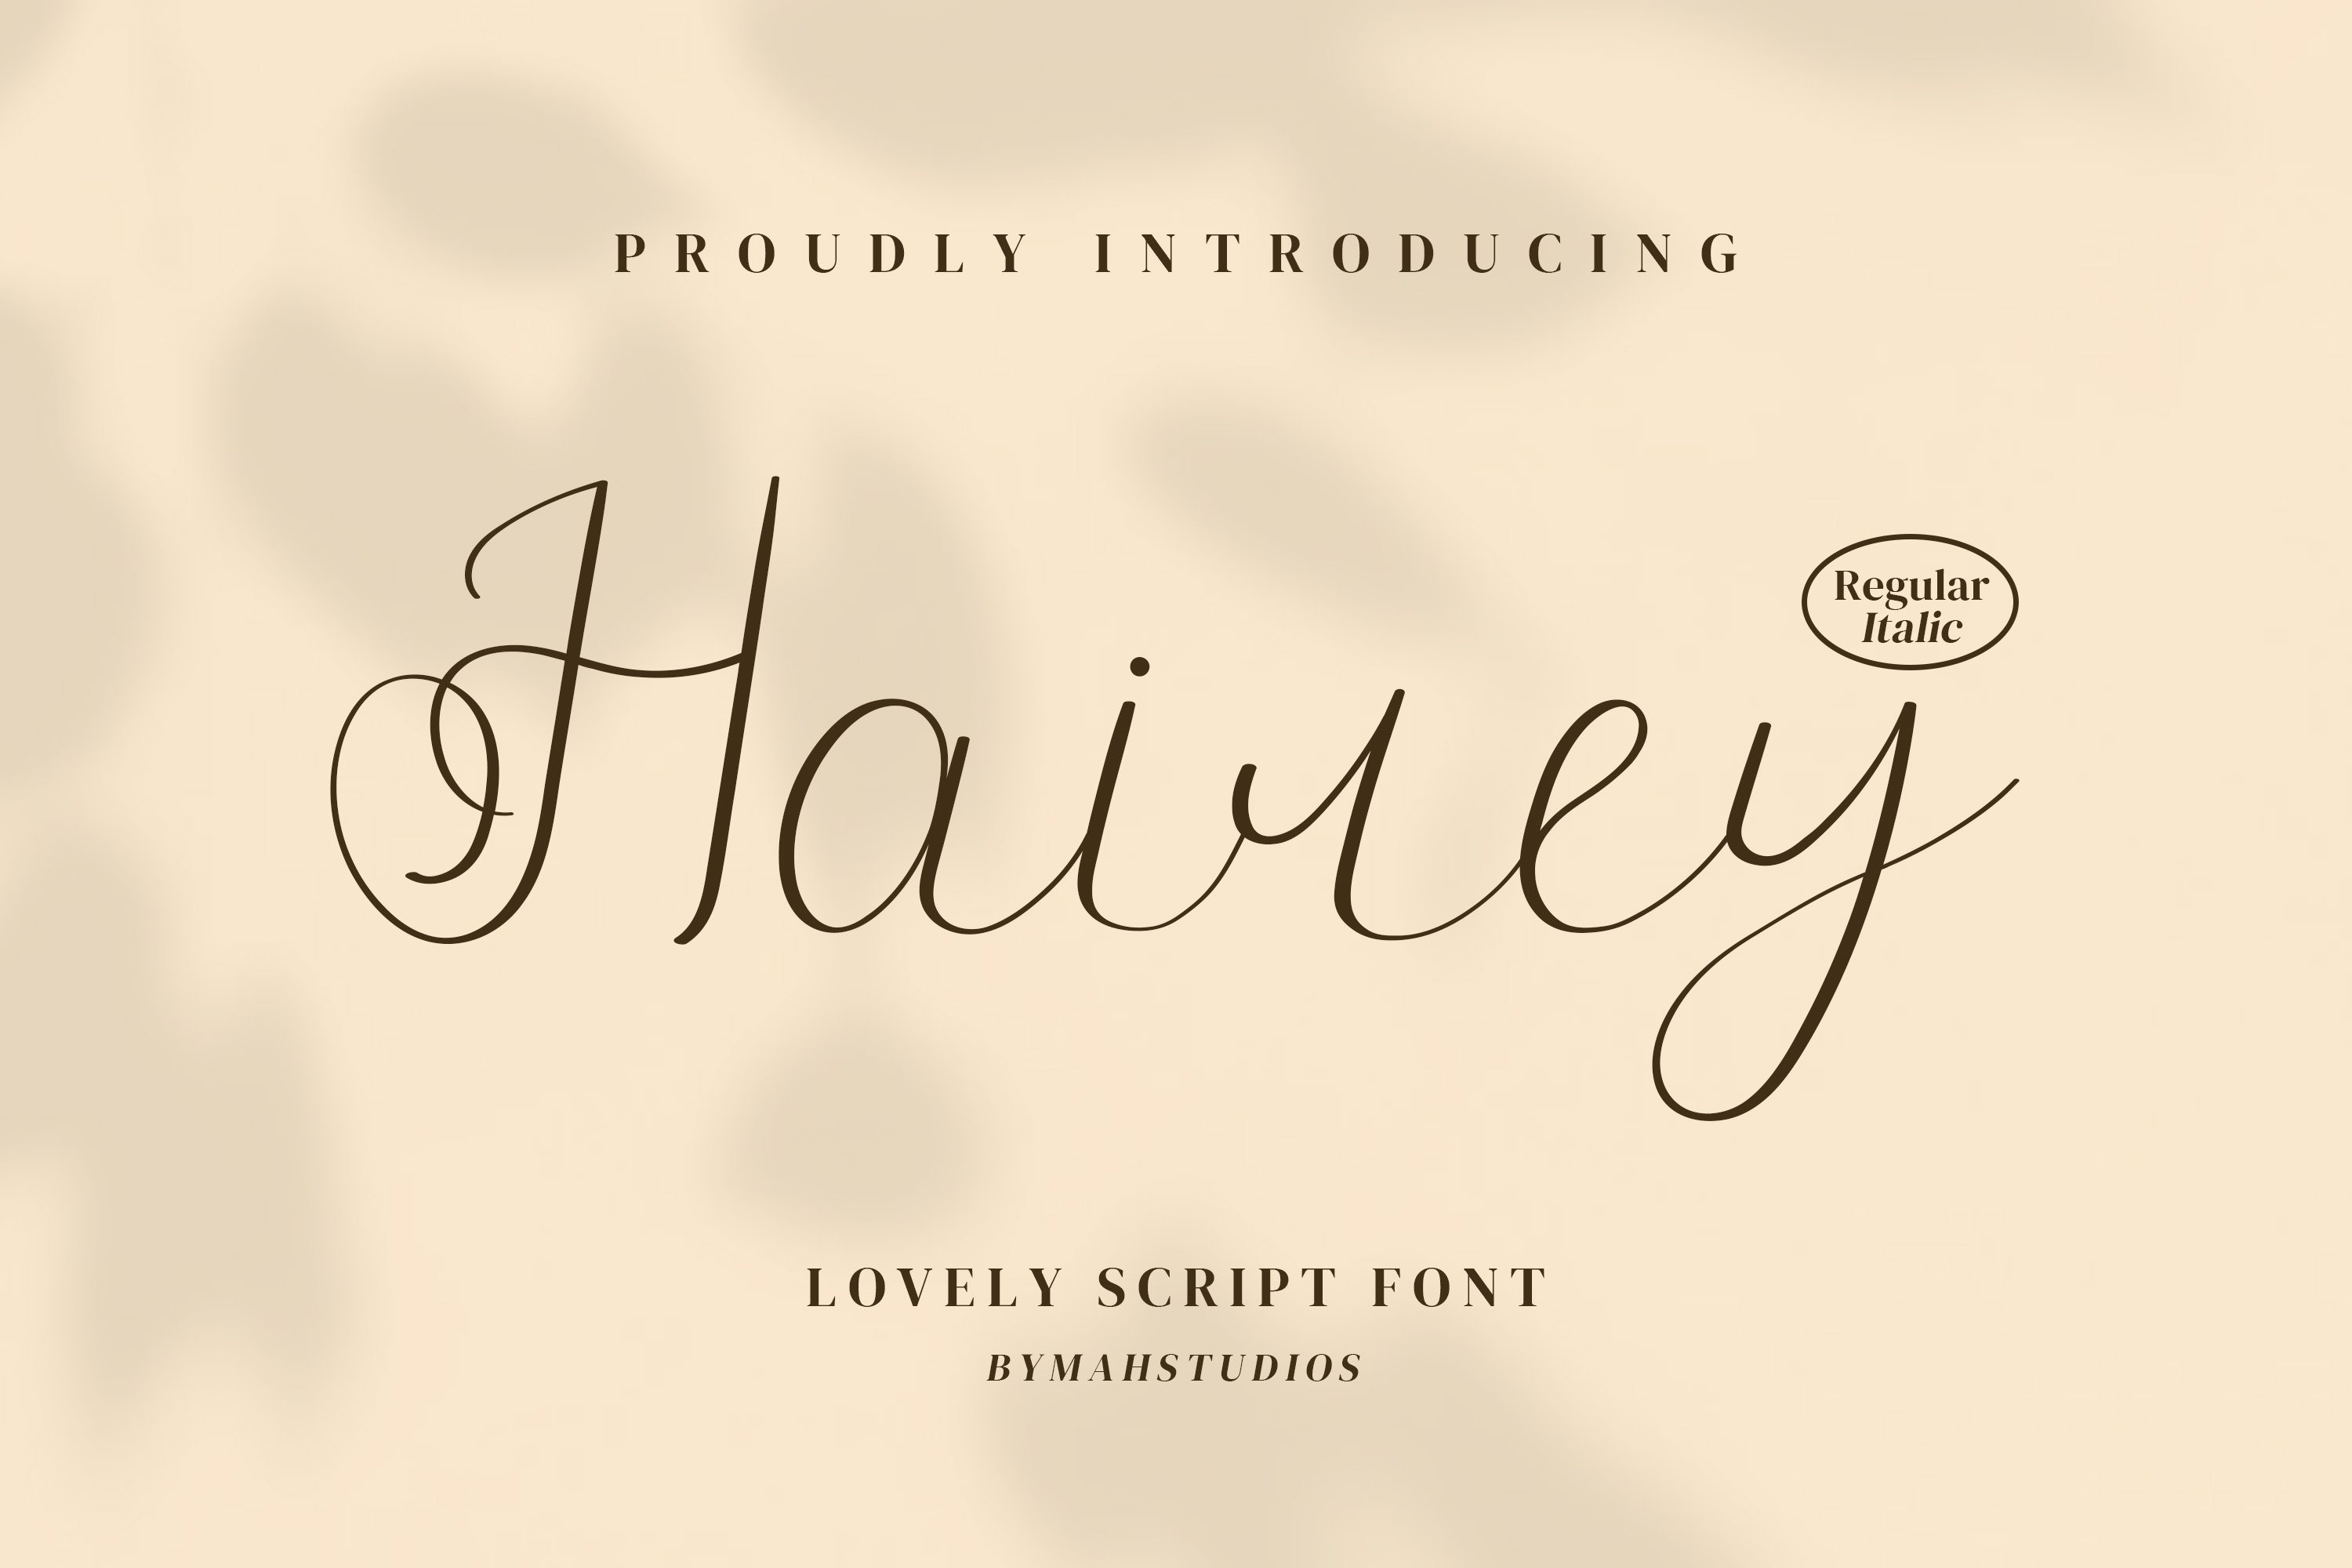 Hairey Script Fontscover image.